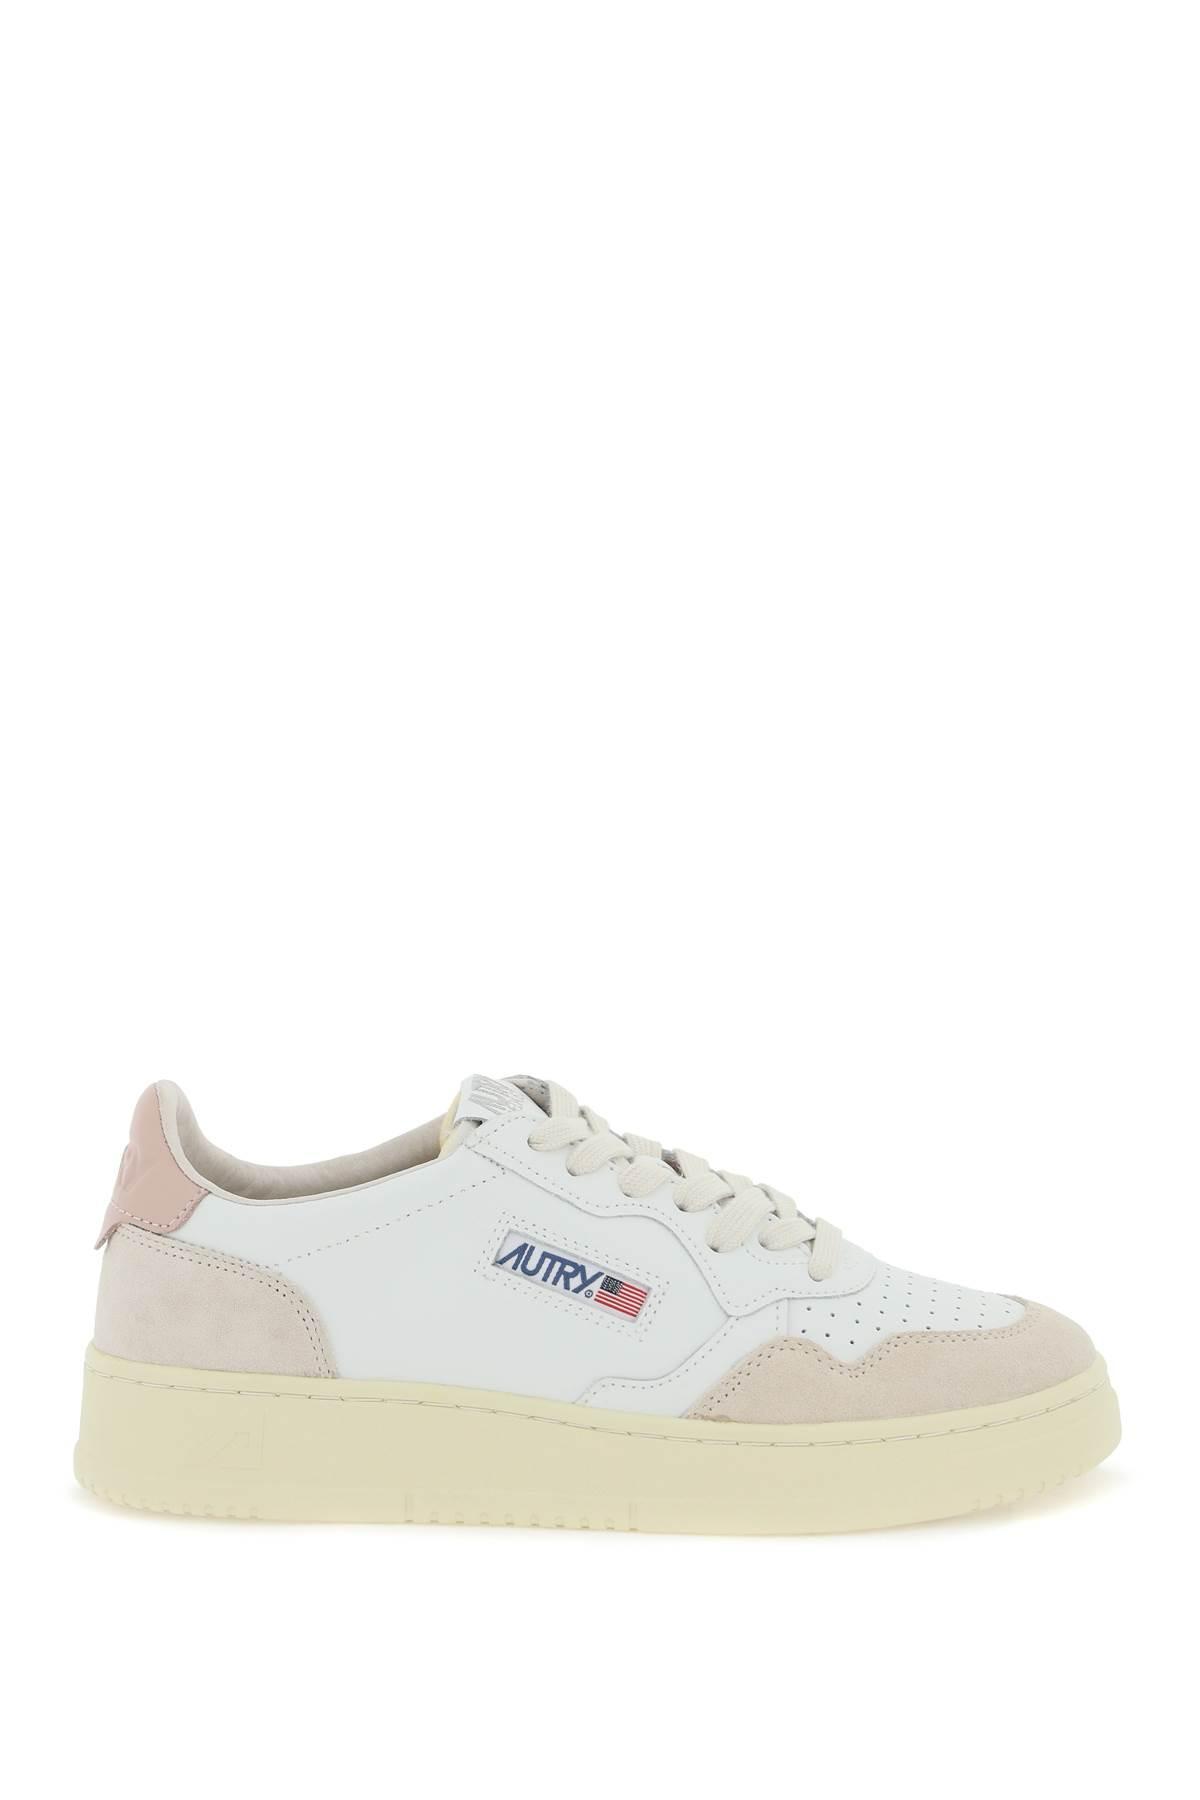 Autry Leather Medalist Low Sneakers in White | Lyst